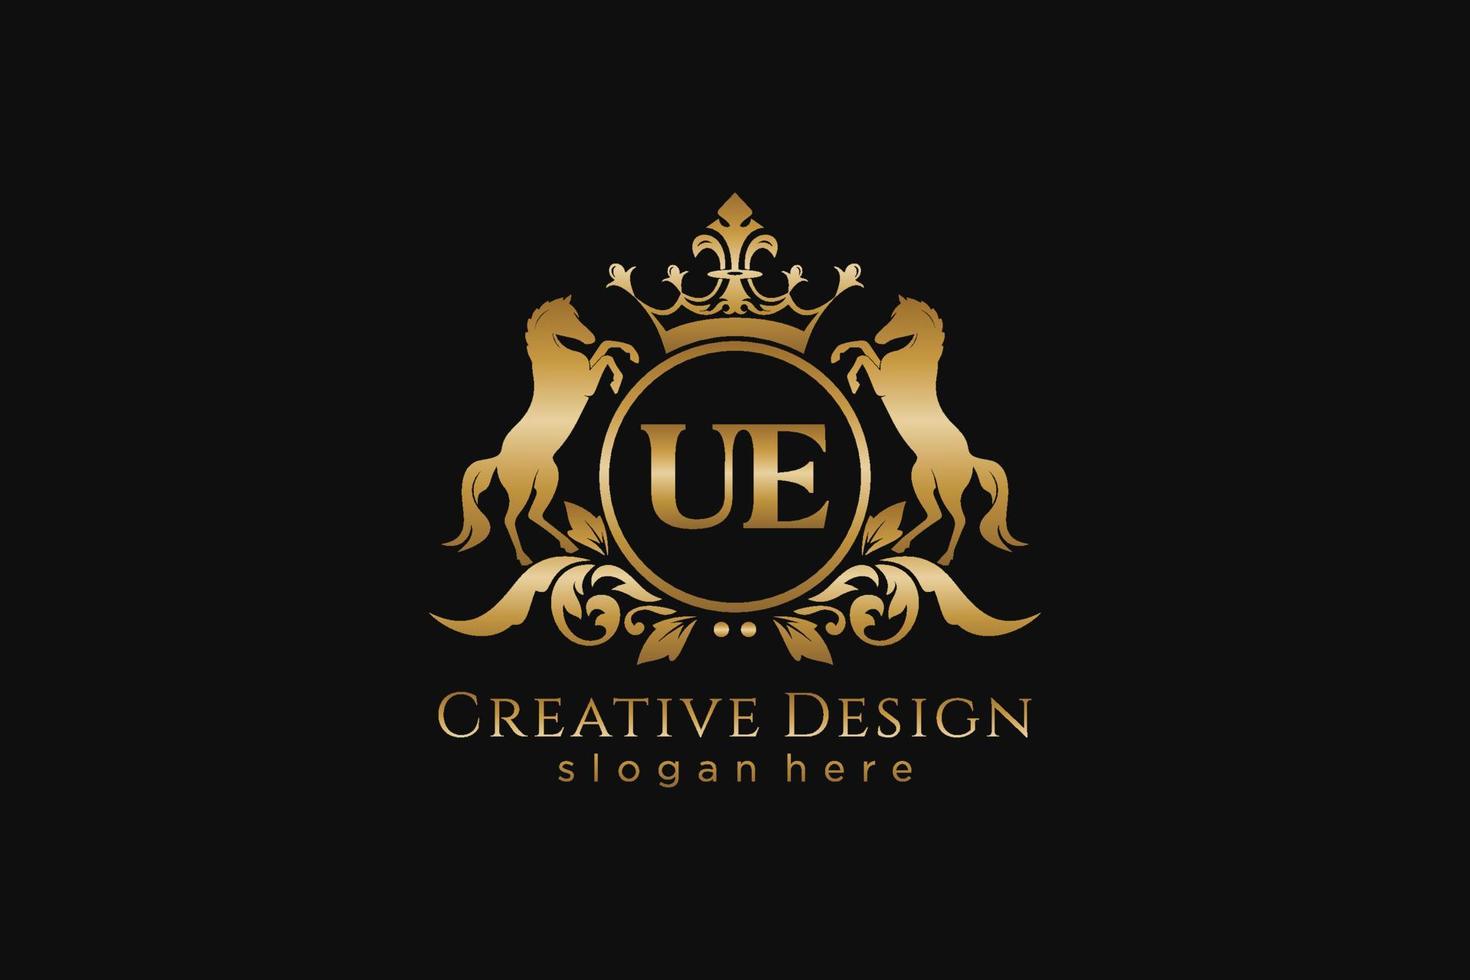 initial UE Retro golden crest with circle and two horses, badge template with scrolls and royal crown - perfect for luxurious branding projects vector